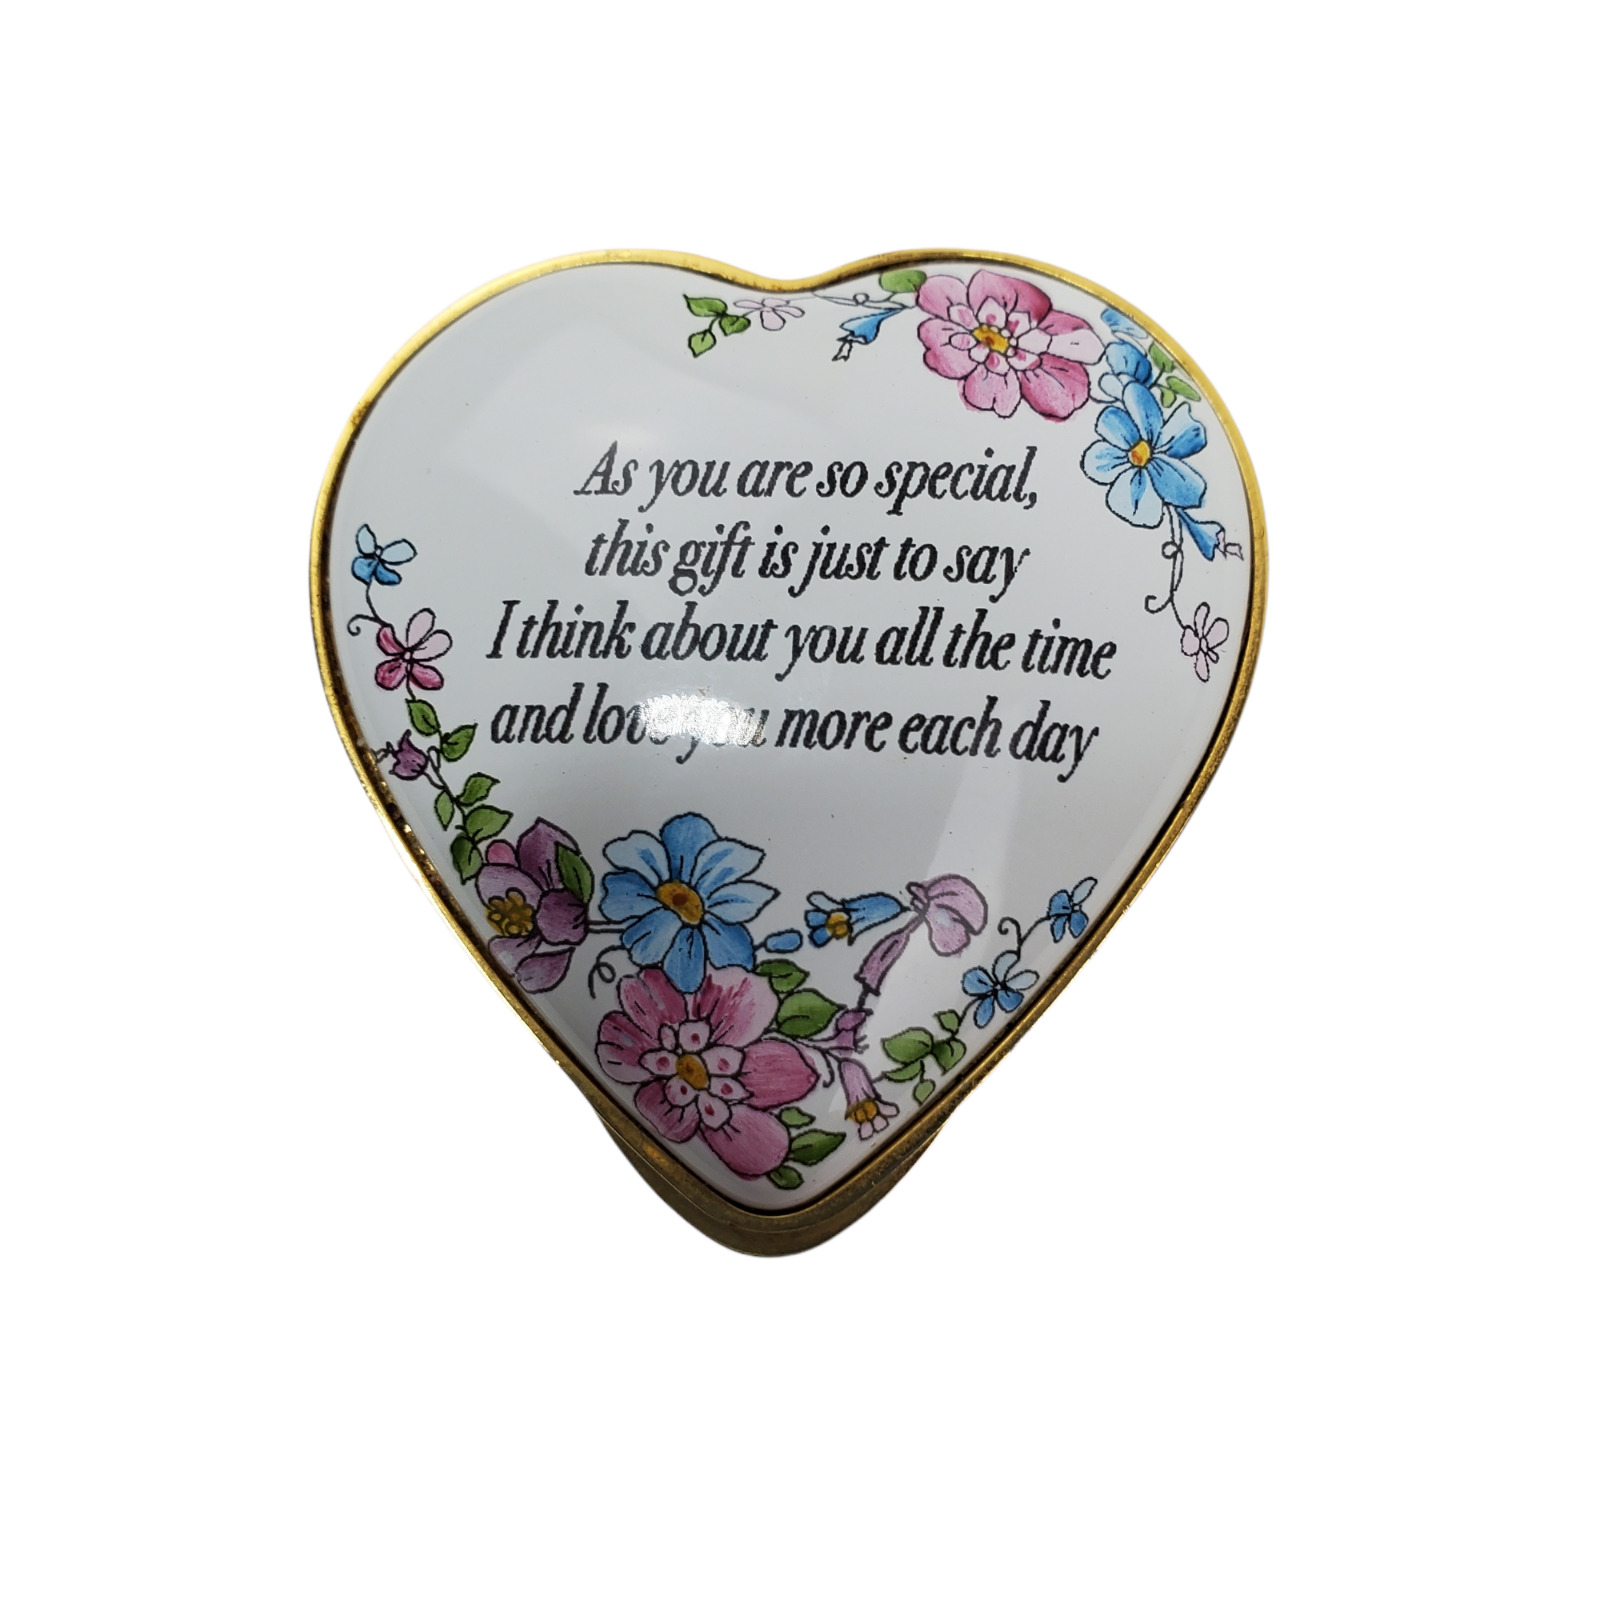 Vintage Halcyon Days Enamel Heart Box As You Are So Special Love Romance Mothers